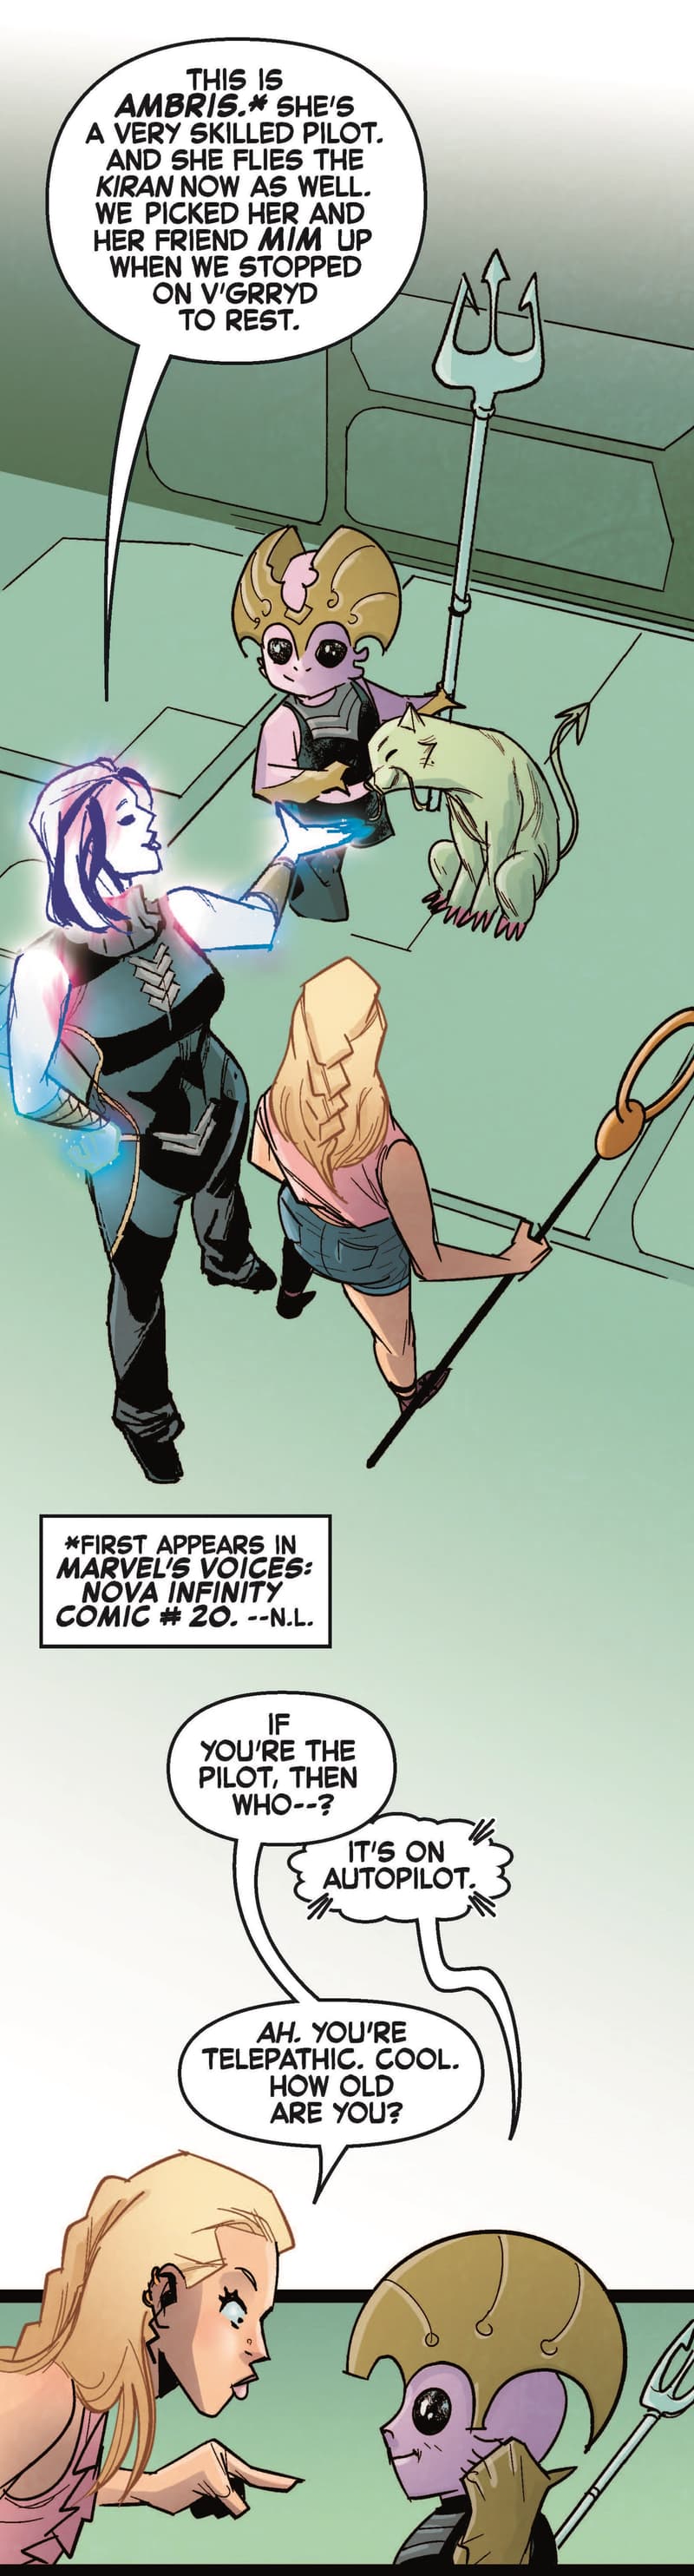 Preview panels from MARVEL’S VOICES: RUNAWAYS INFINITY COMIC #58.